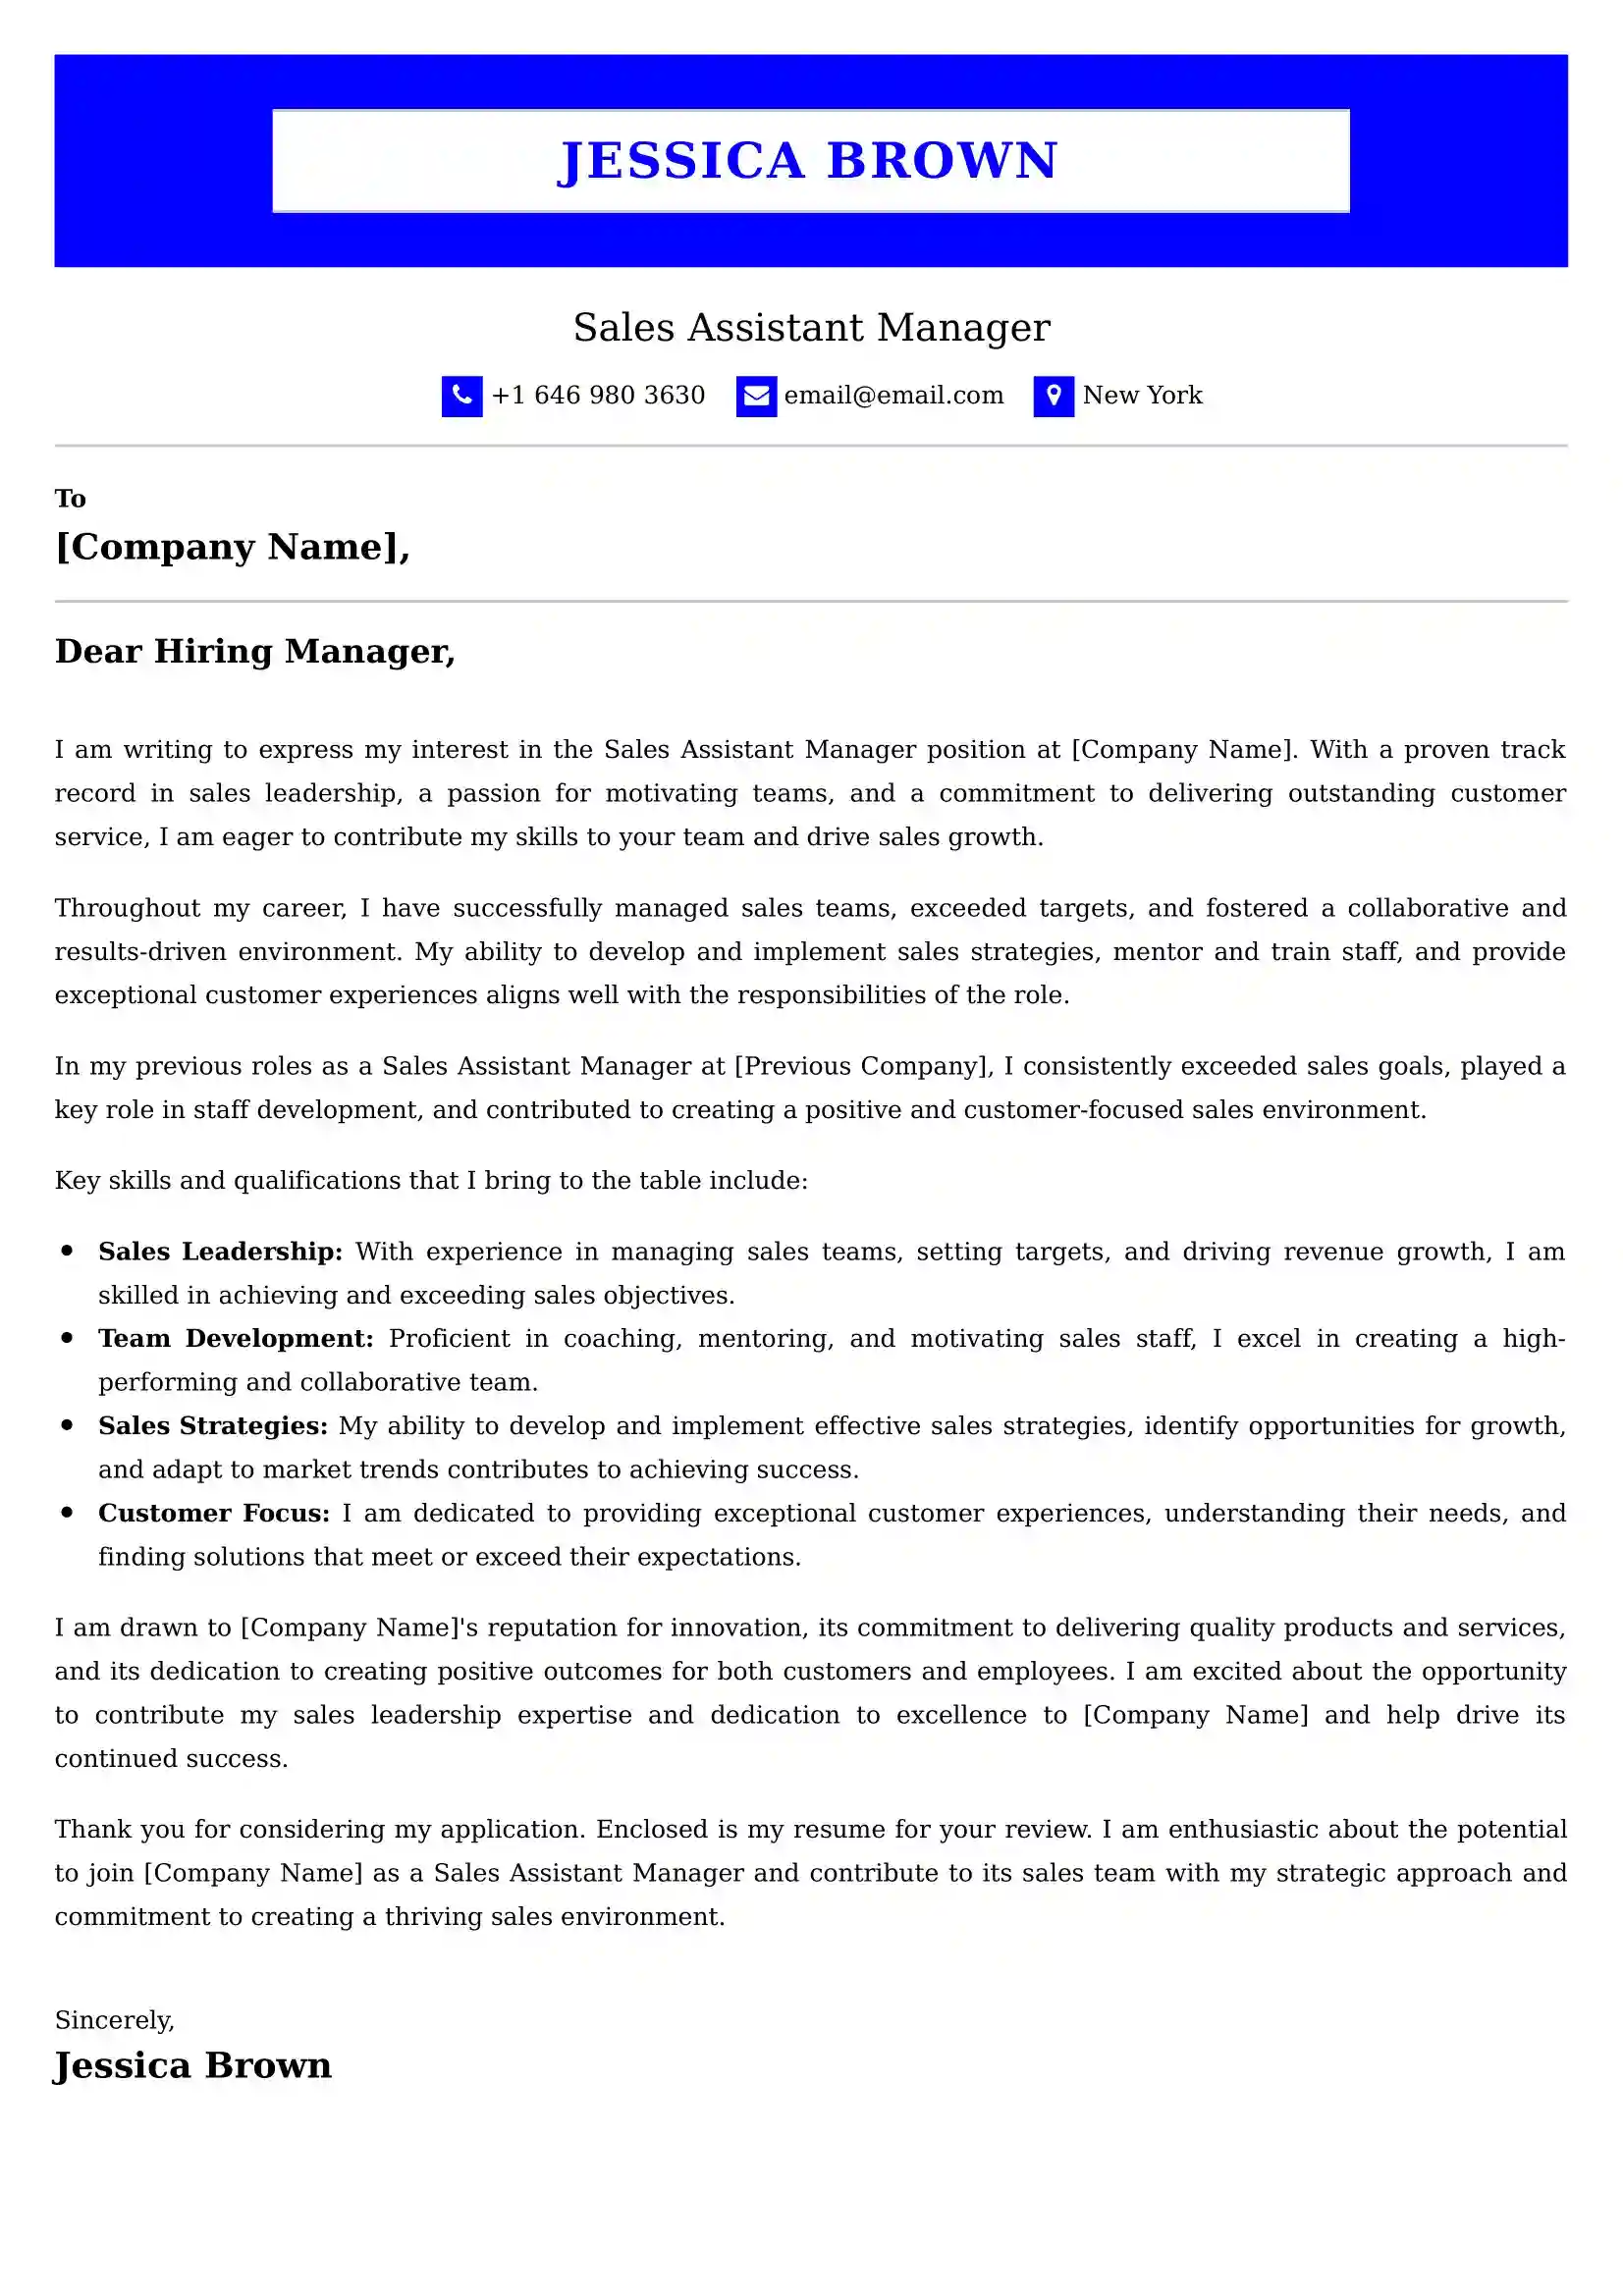 Sales Assistant Manager Cover Letter Sample